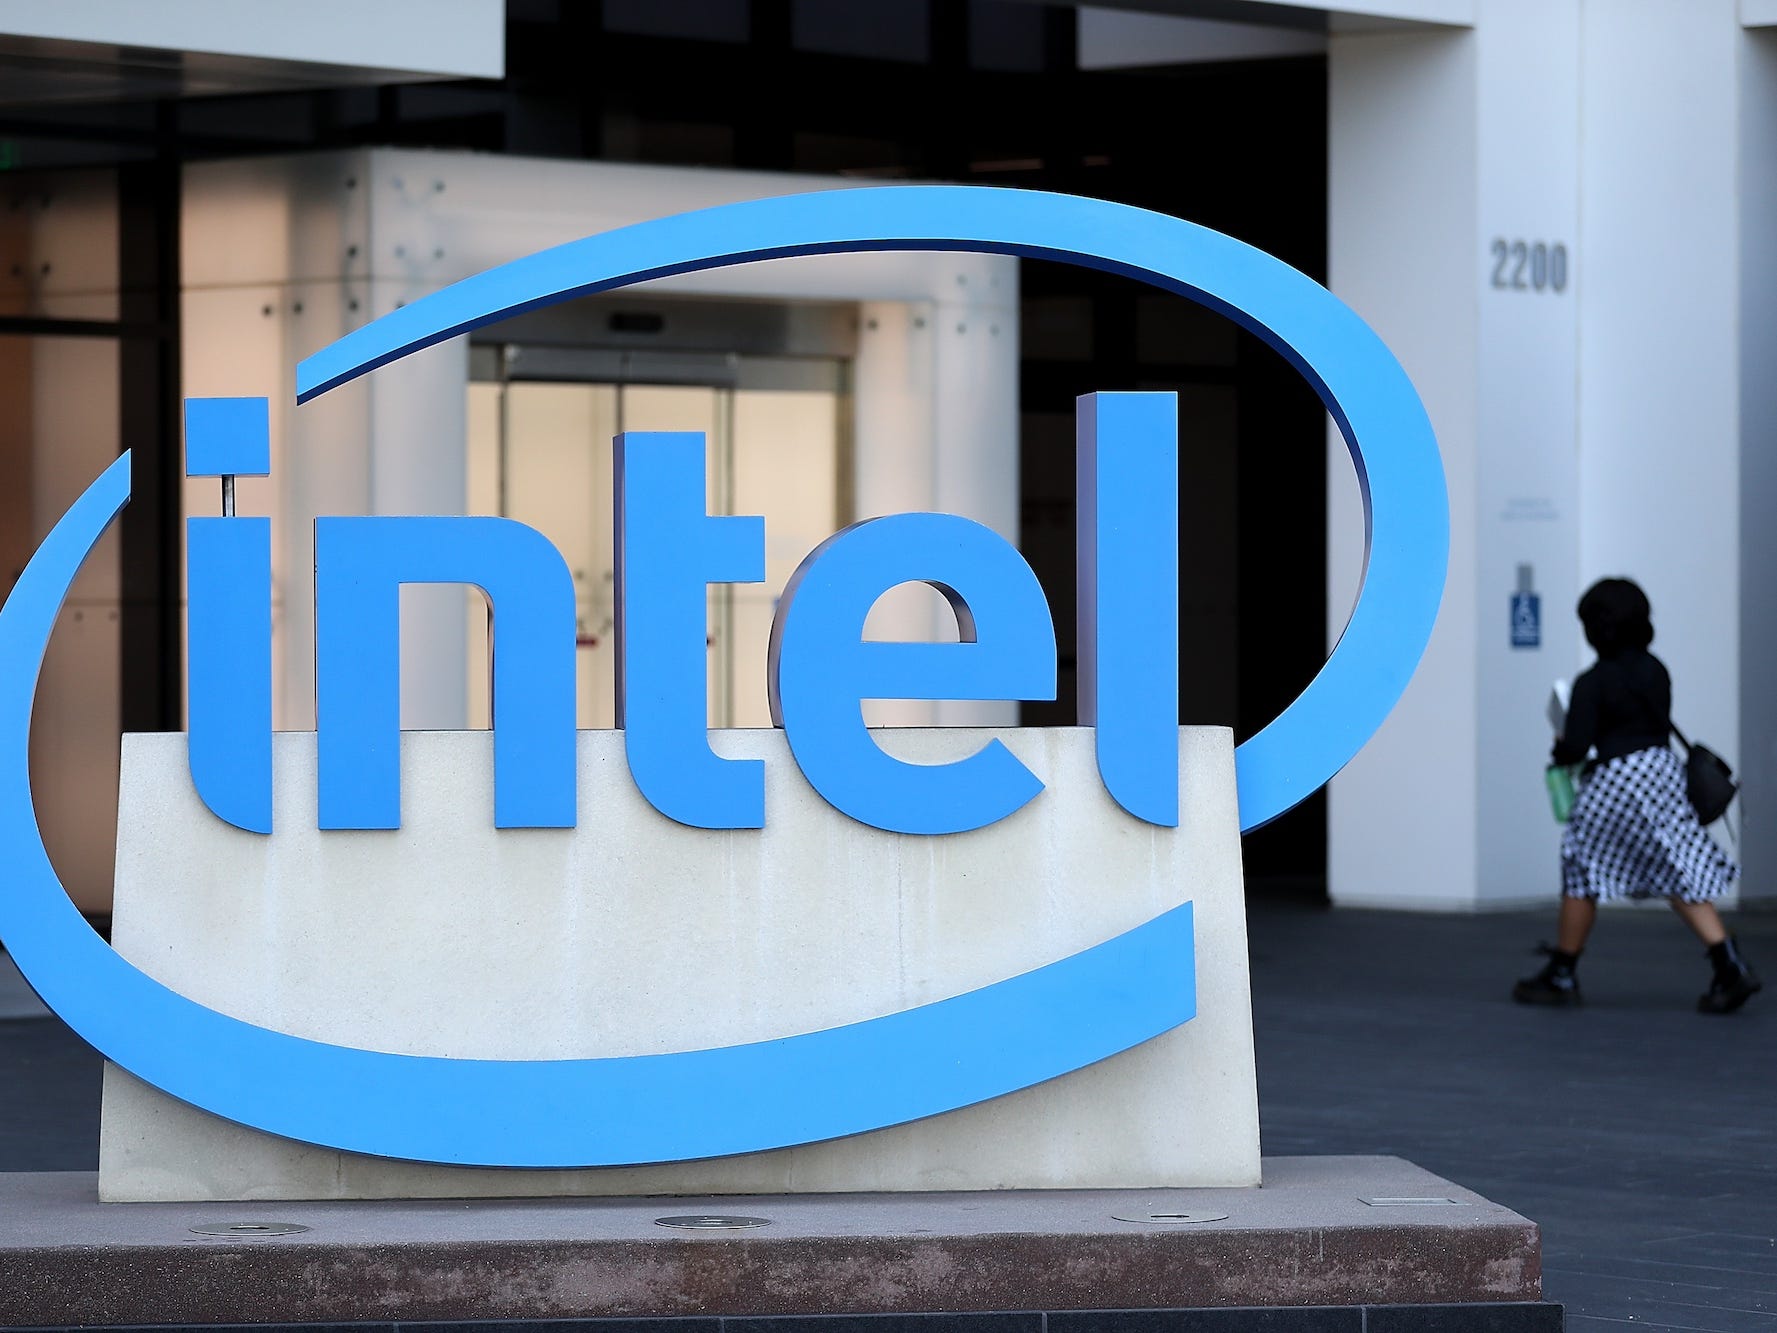 <p>At <a href="https://www.businessinsider.com/how-to-get-hired-intel-salary-tech-skills-certifications-2022-6">Intel</a>, one opportunity for those without a bachelor's degree is working as a technician. Cindi Harper, vice president of talent planning and acquisition at Intel, said the company hires a lot of technicians who have different backgrounds.</p><p>Harper said while Intel does support "a lot of two-year programs, technical programs that have the STEM disciplines," there "are a lot of transferable skills without having the technical schooling."</p><p>Technicians make up 70% of Intel's workforce in their factories, Harper said.</p><p>"If they have equivalent experience in those domain areas, then we focus less on whether or not they come with a two-year degree and zero experience because that's the other side of the equation," Harper said. "We hire out of the two-year schools, which they likely don't have a whole lot of training and then we train them from within."</p><p>When asked about other opportunities at the company for those without a degree, Harper said people with equivalent work experience would be considered.</p><p>"We are a huge supporter of the college programs of a two-year, four-year, master's, PhD level," Harper said. "However, if they have equivalent to that in a work experience and/or more without the degree, they will be considered as well."</p><p>One tip from Harper for job candidates is to send an email that can highlight your interest or transferable skills you may have.</p>